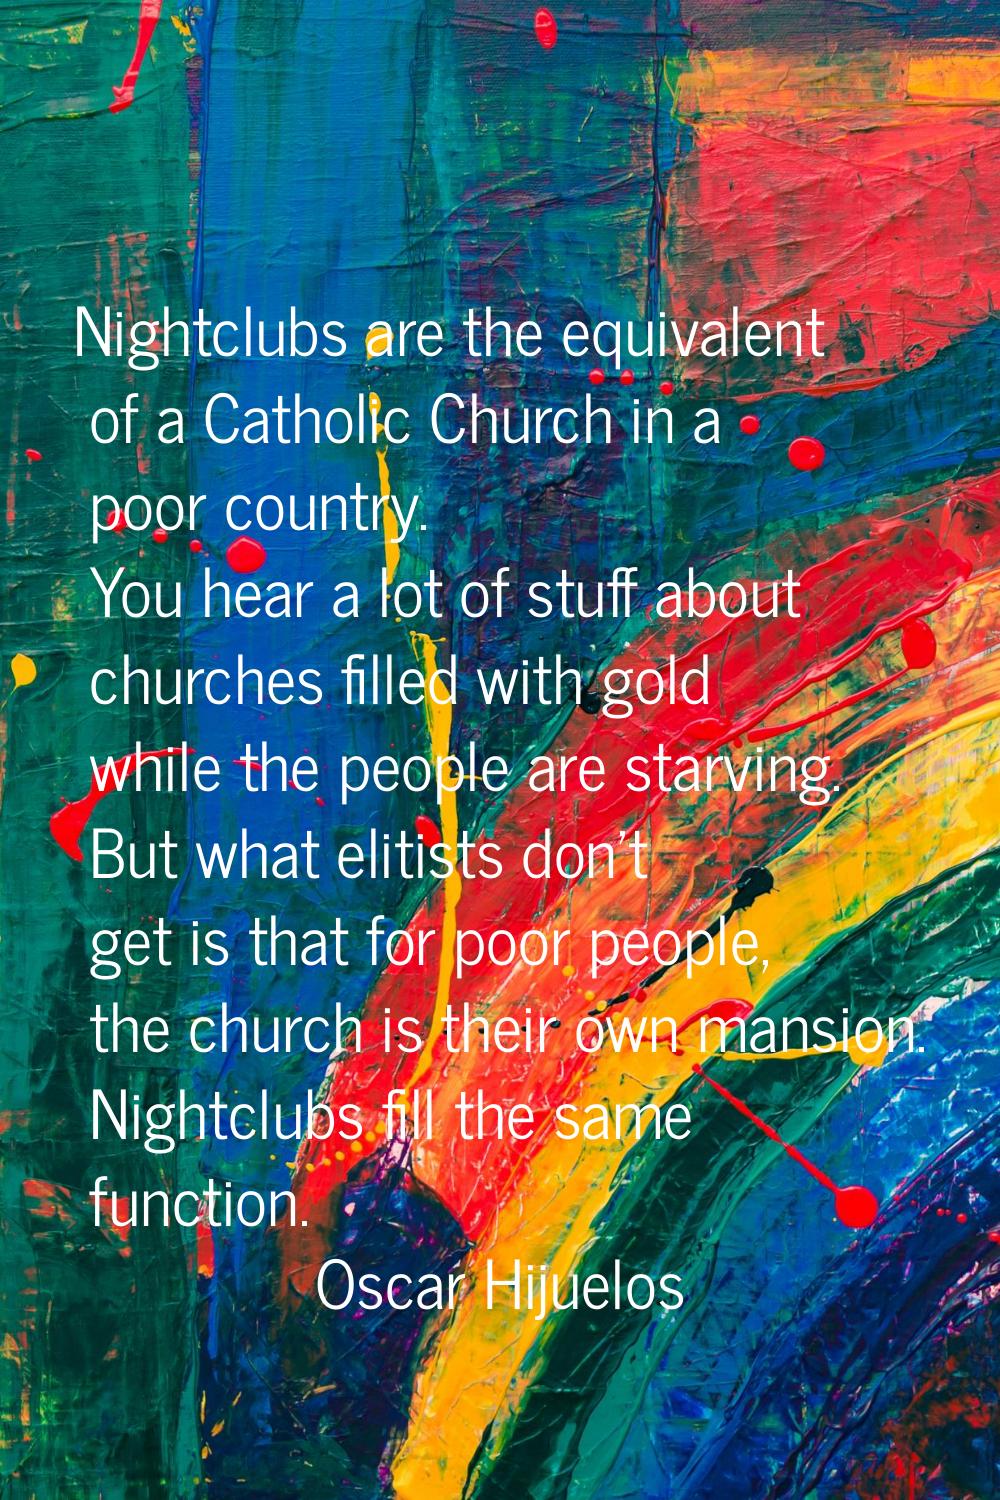 Nightclubs are the equivalent of a Catholic Church in a poor country. You hear a lot of stuff about